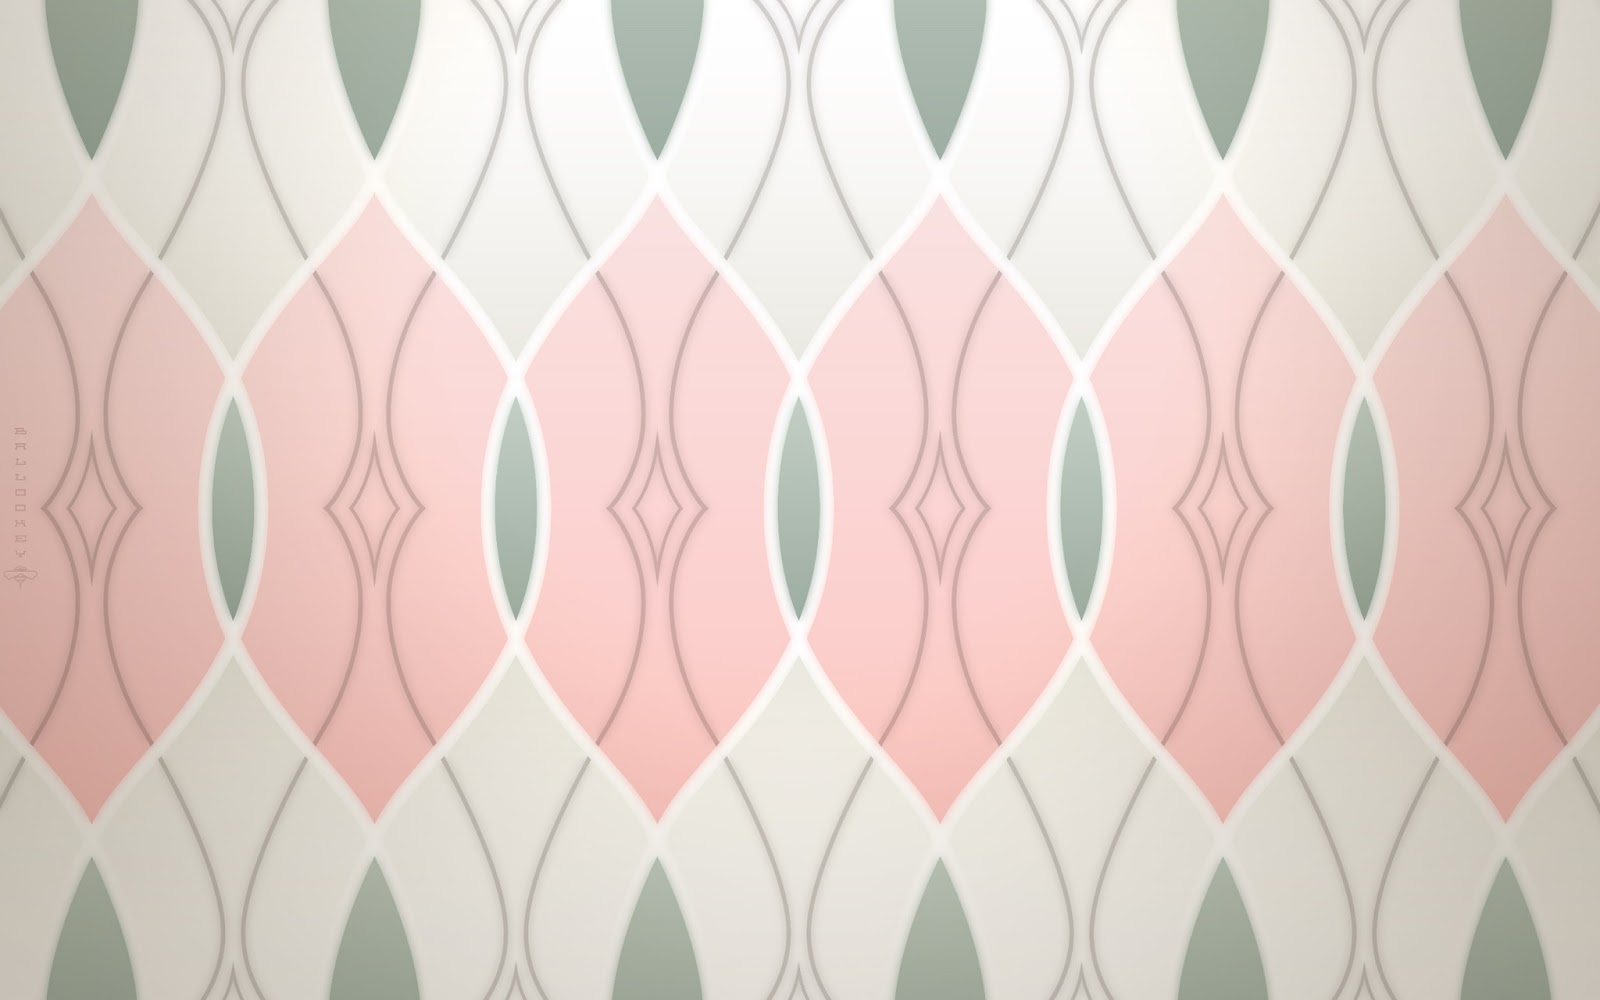 Pattern Hd Backgrounds For Photoshop - 1440p - HD Wallpaper 